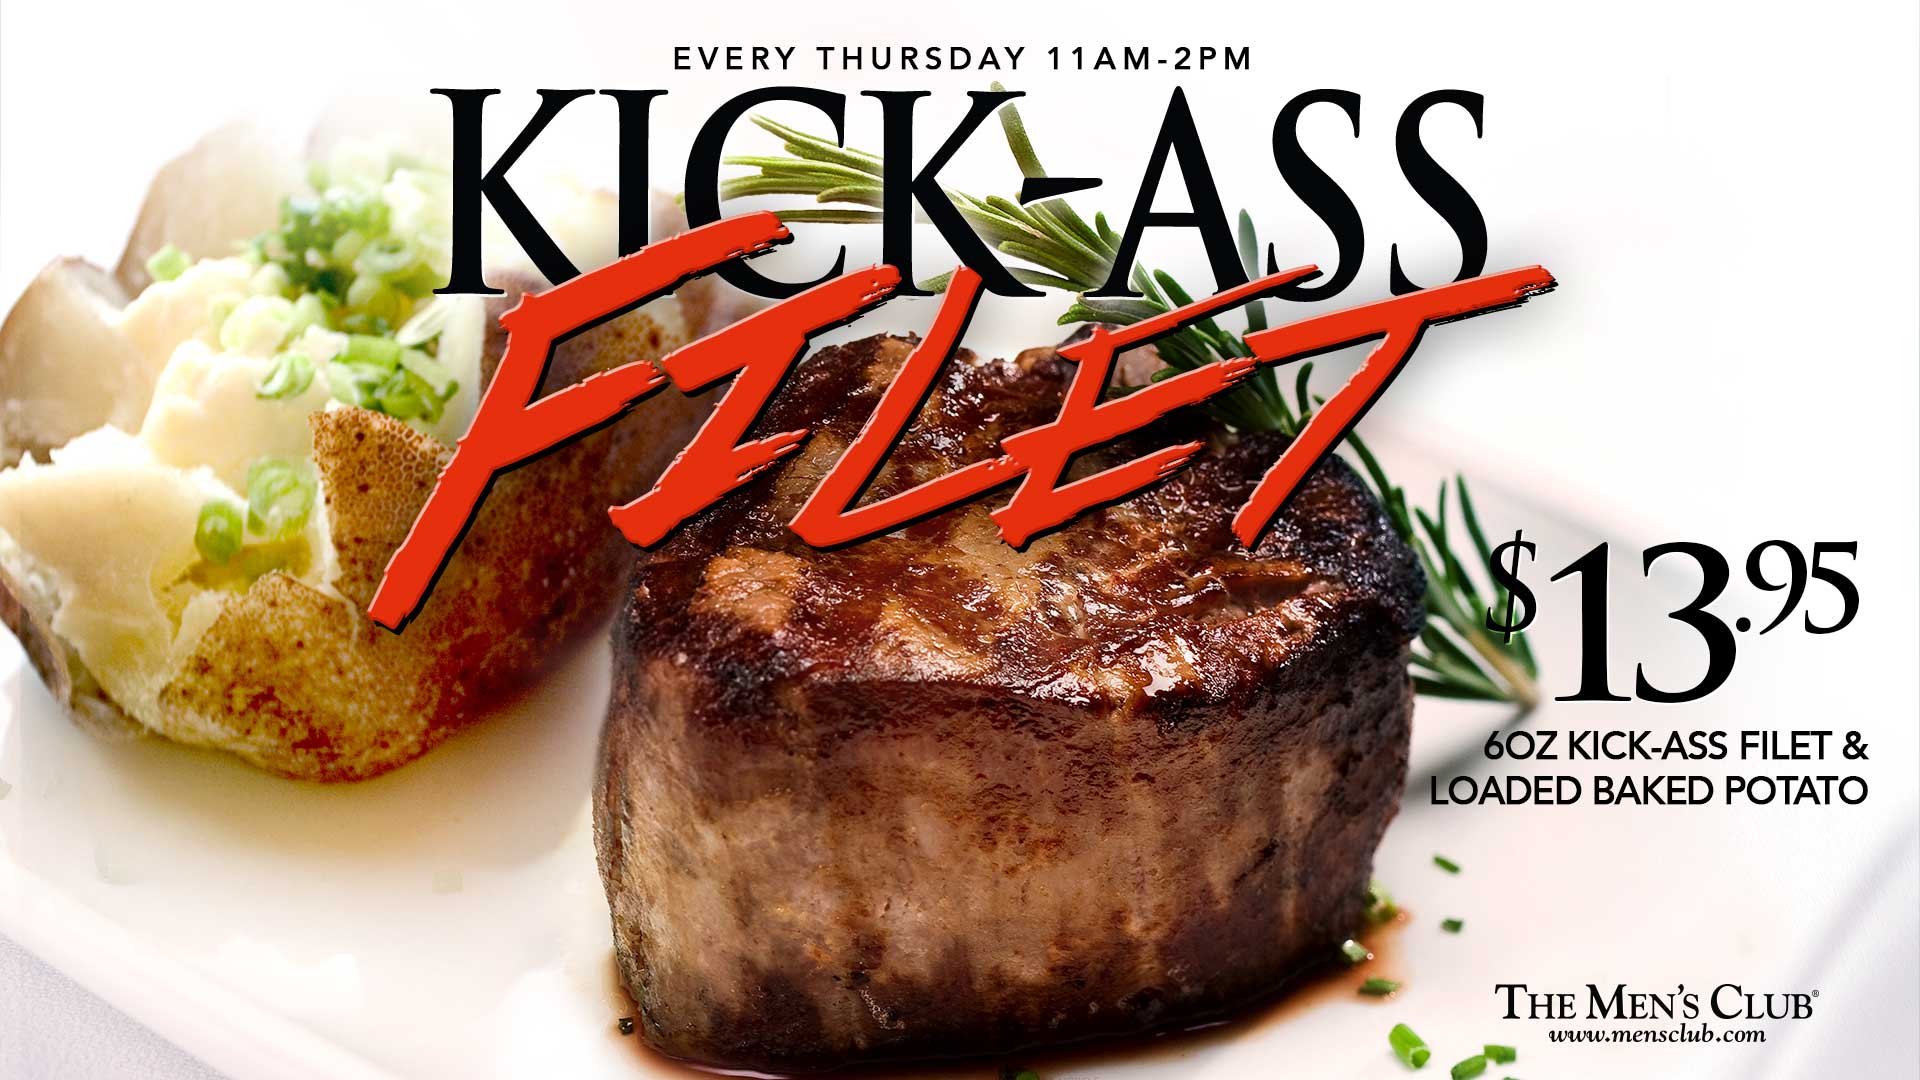 image of Kick-Ass Filet every Thursday 11am-2pm at The Men's Club of Dallas